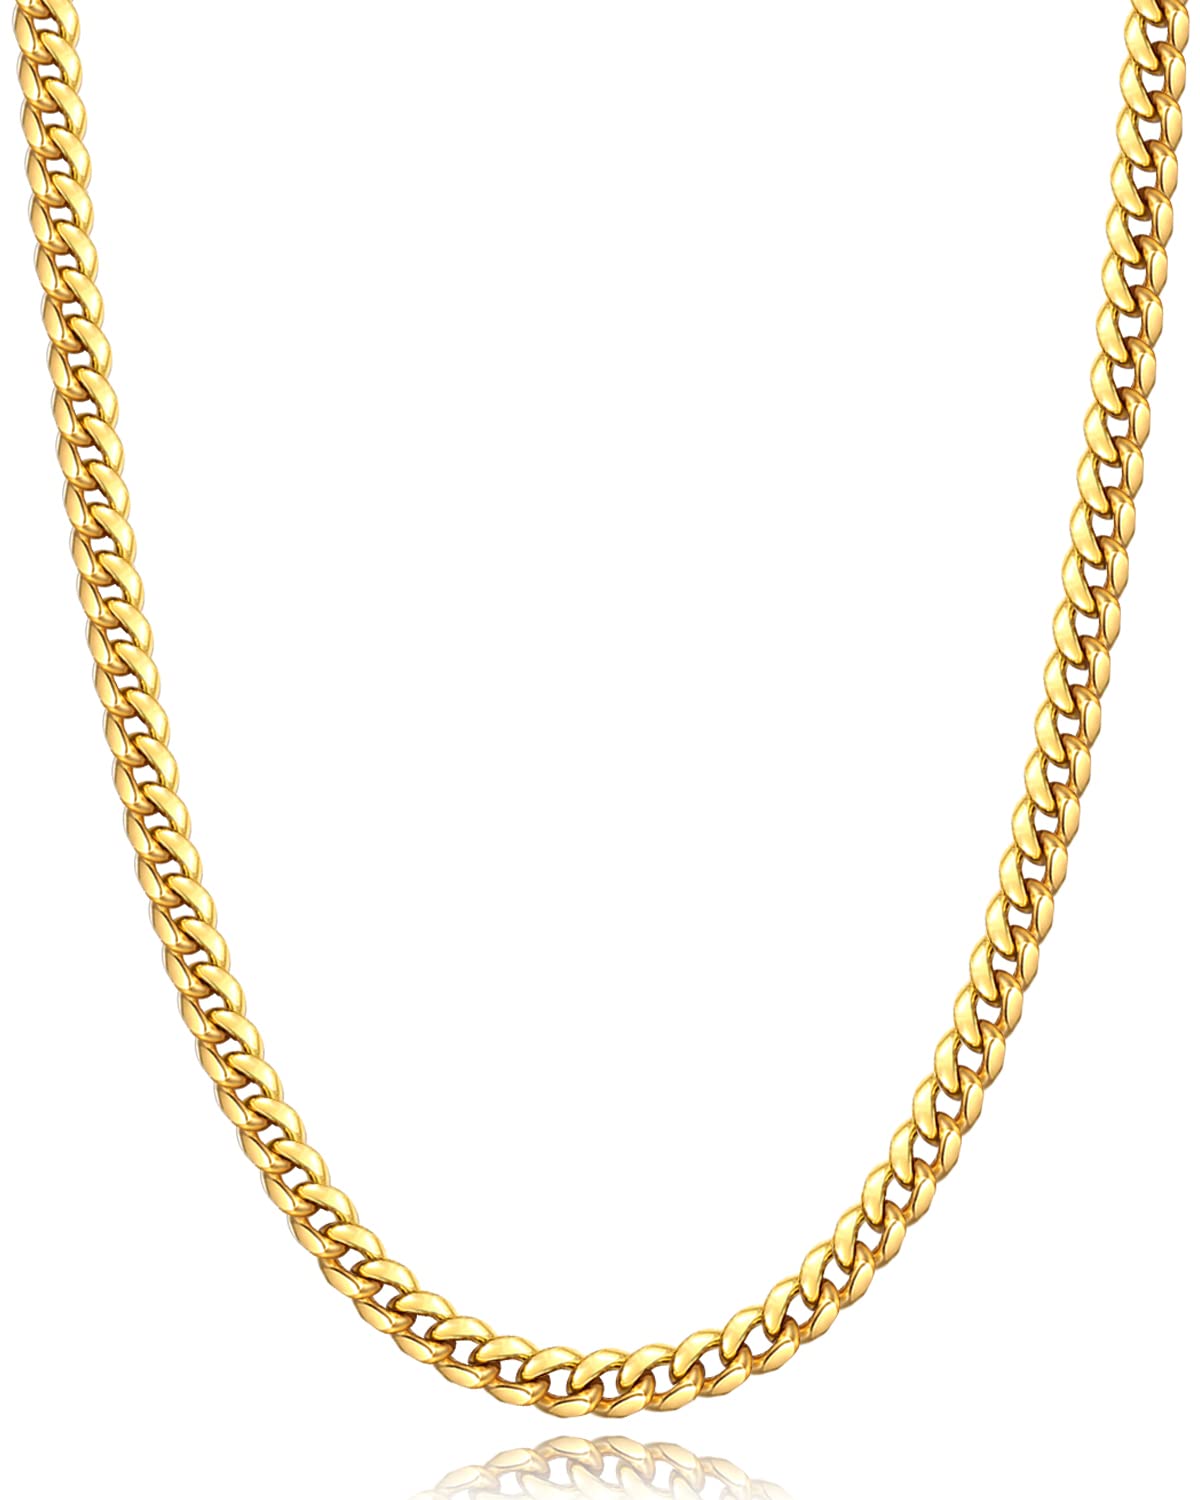 Momlovu Silver Chain Gold Chain for Men Boys, 18K Gold Plated Men's Necklaces Chain Cuban Link Chain for Men 4mm/6mm 18/20/22/24/26inch